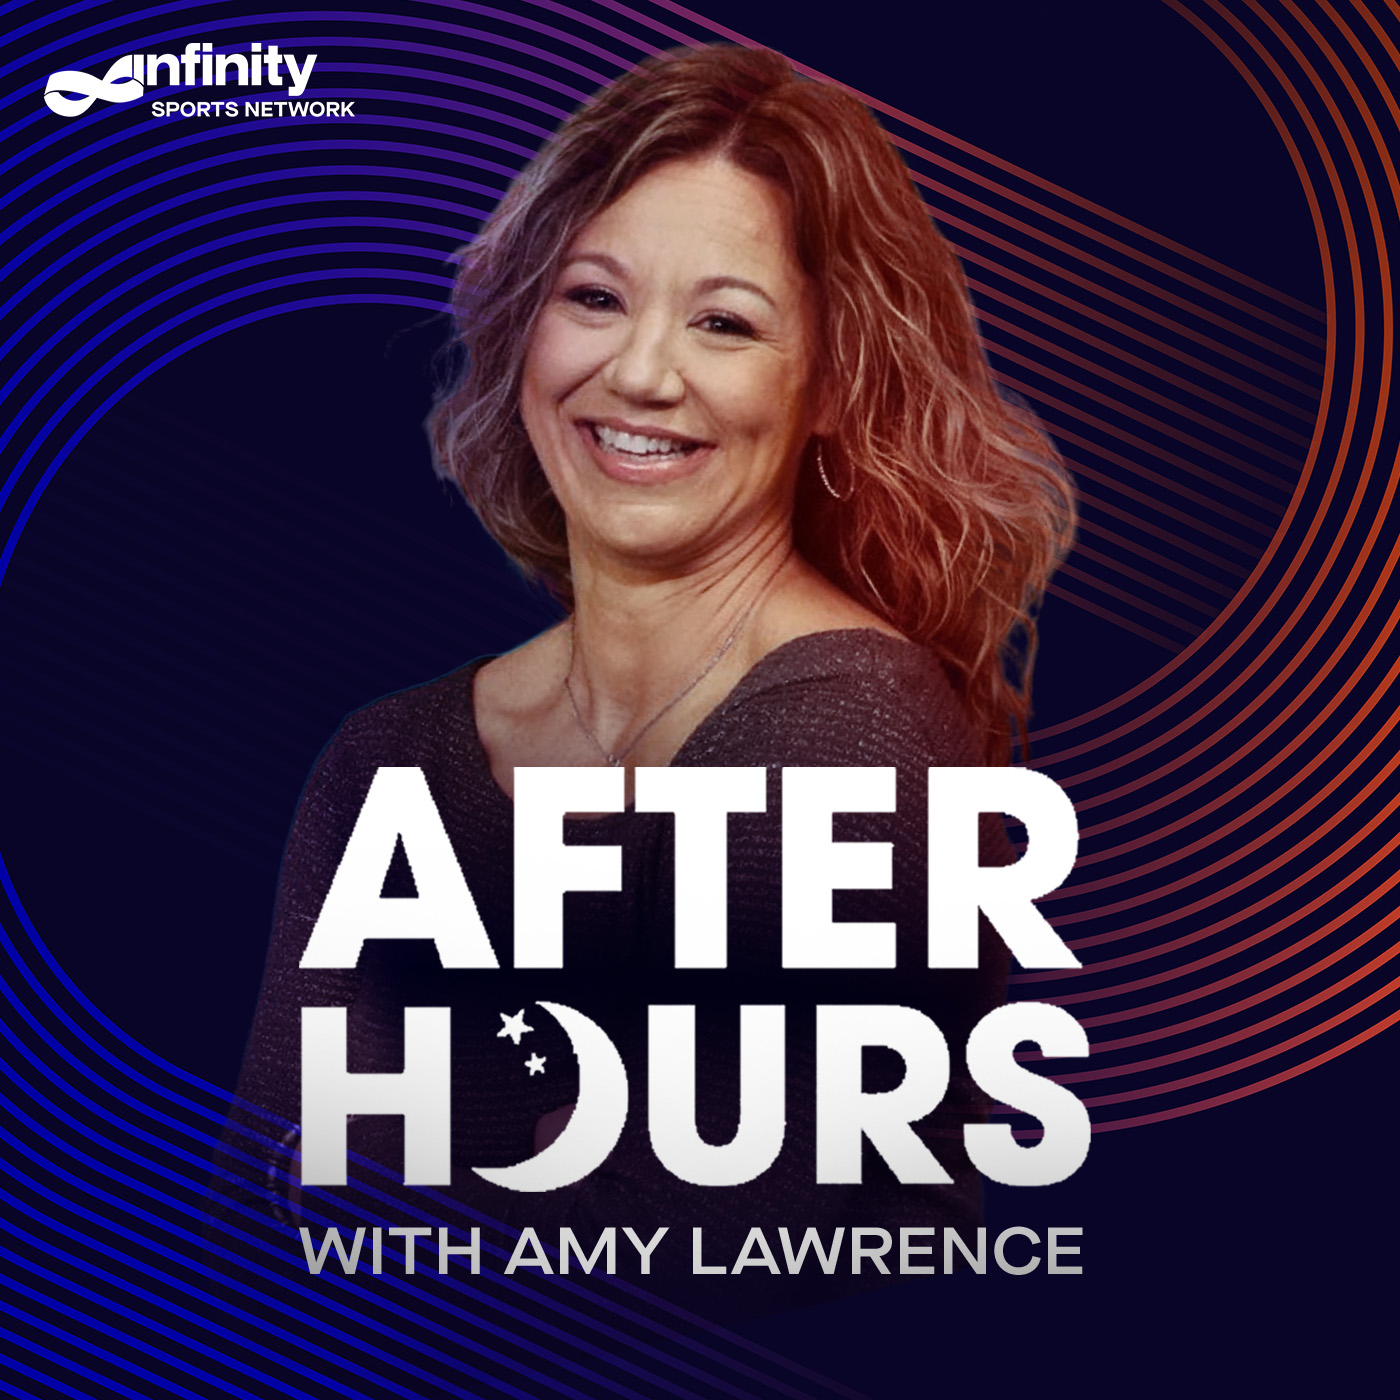 11-19-21 After Hours with Amy Lawrence PODCAST: Hour 2